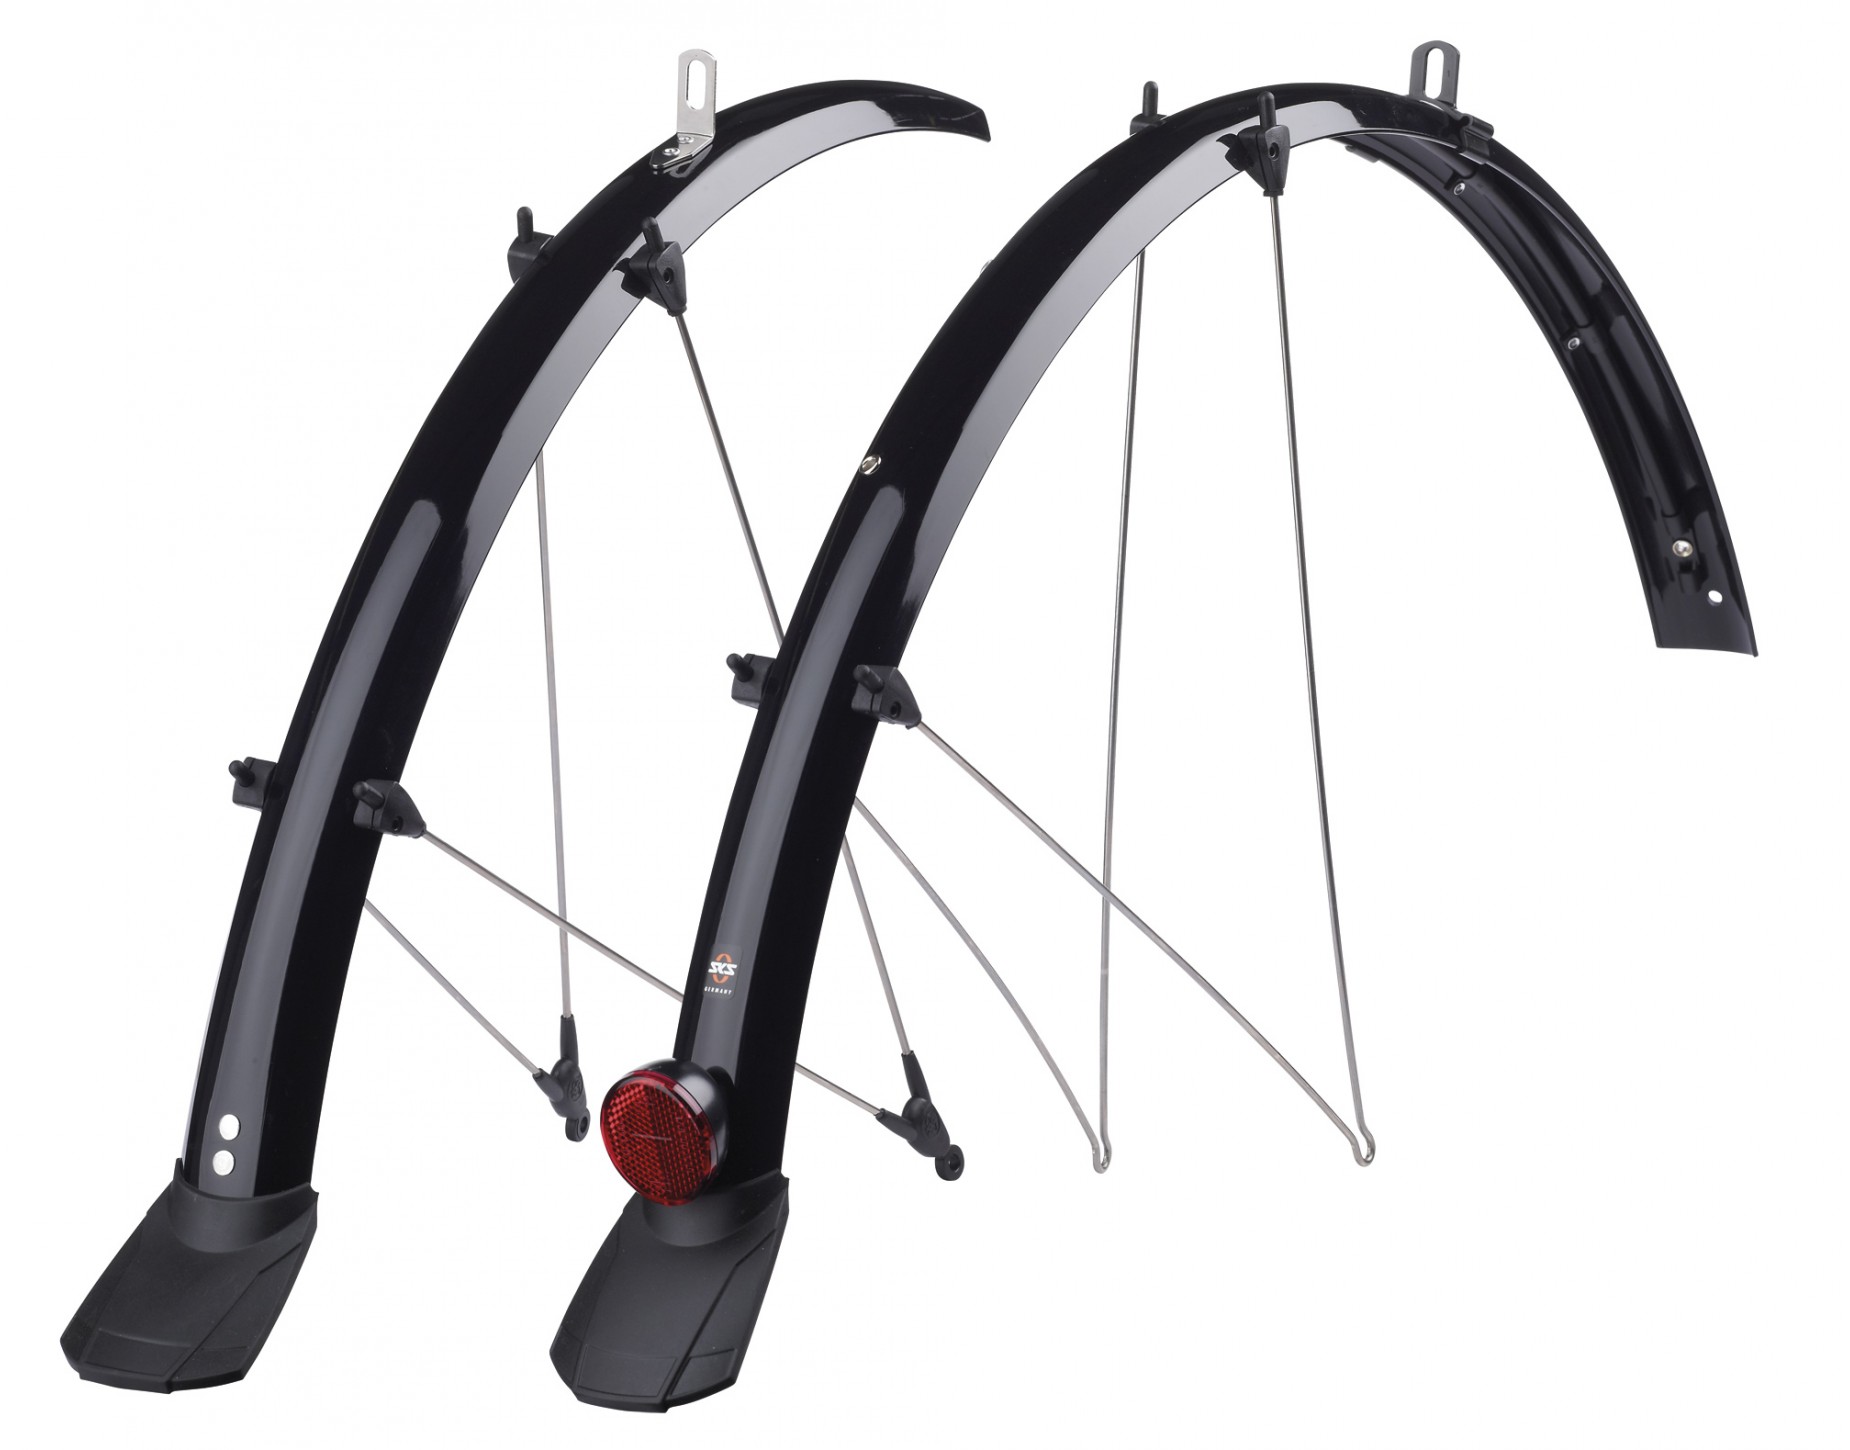 Mudguard set Condorino city 28 stainless steel 36mm with clamps RMS bike 